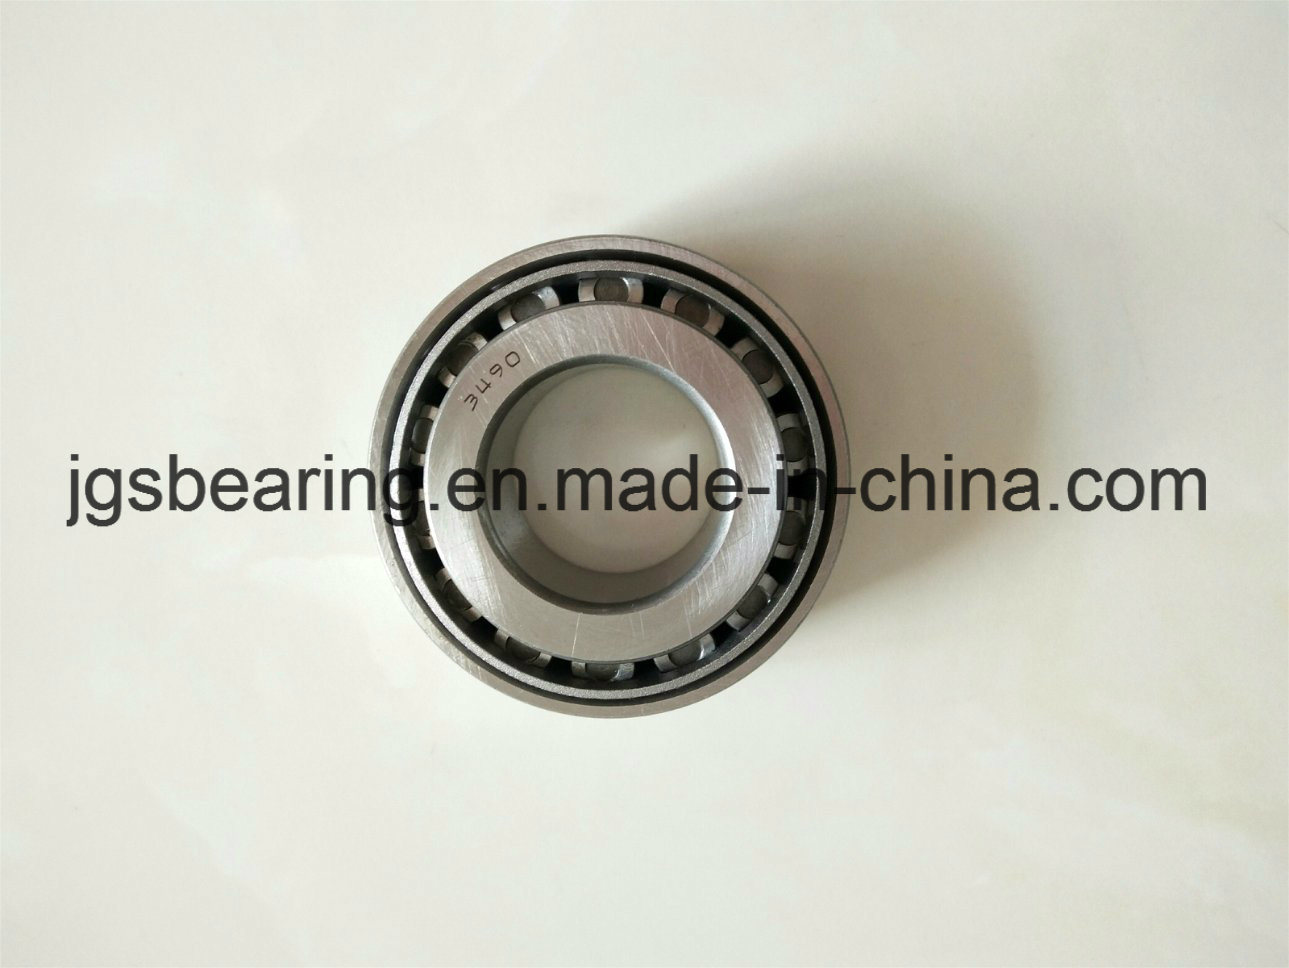 Cutomized Inch Size Non Standard 3490/3420 Taper Roller Bearing for Rolling Machine